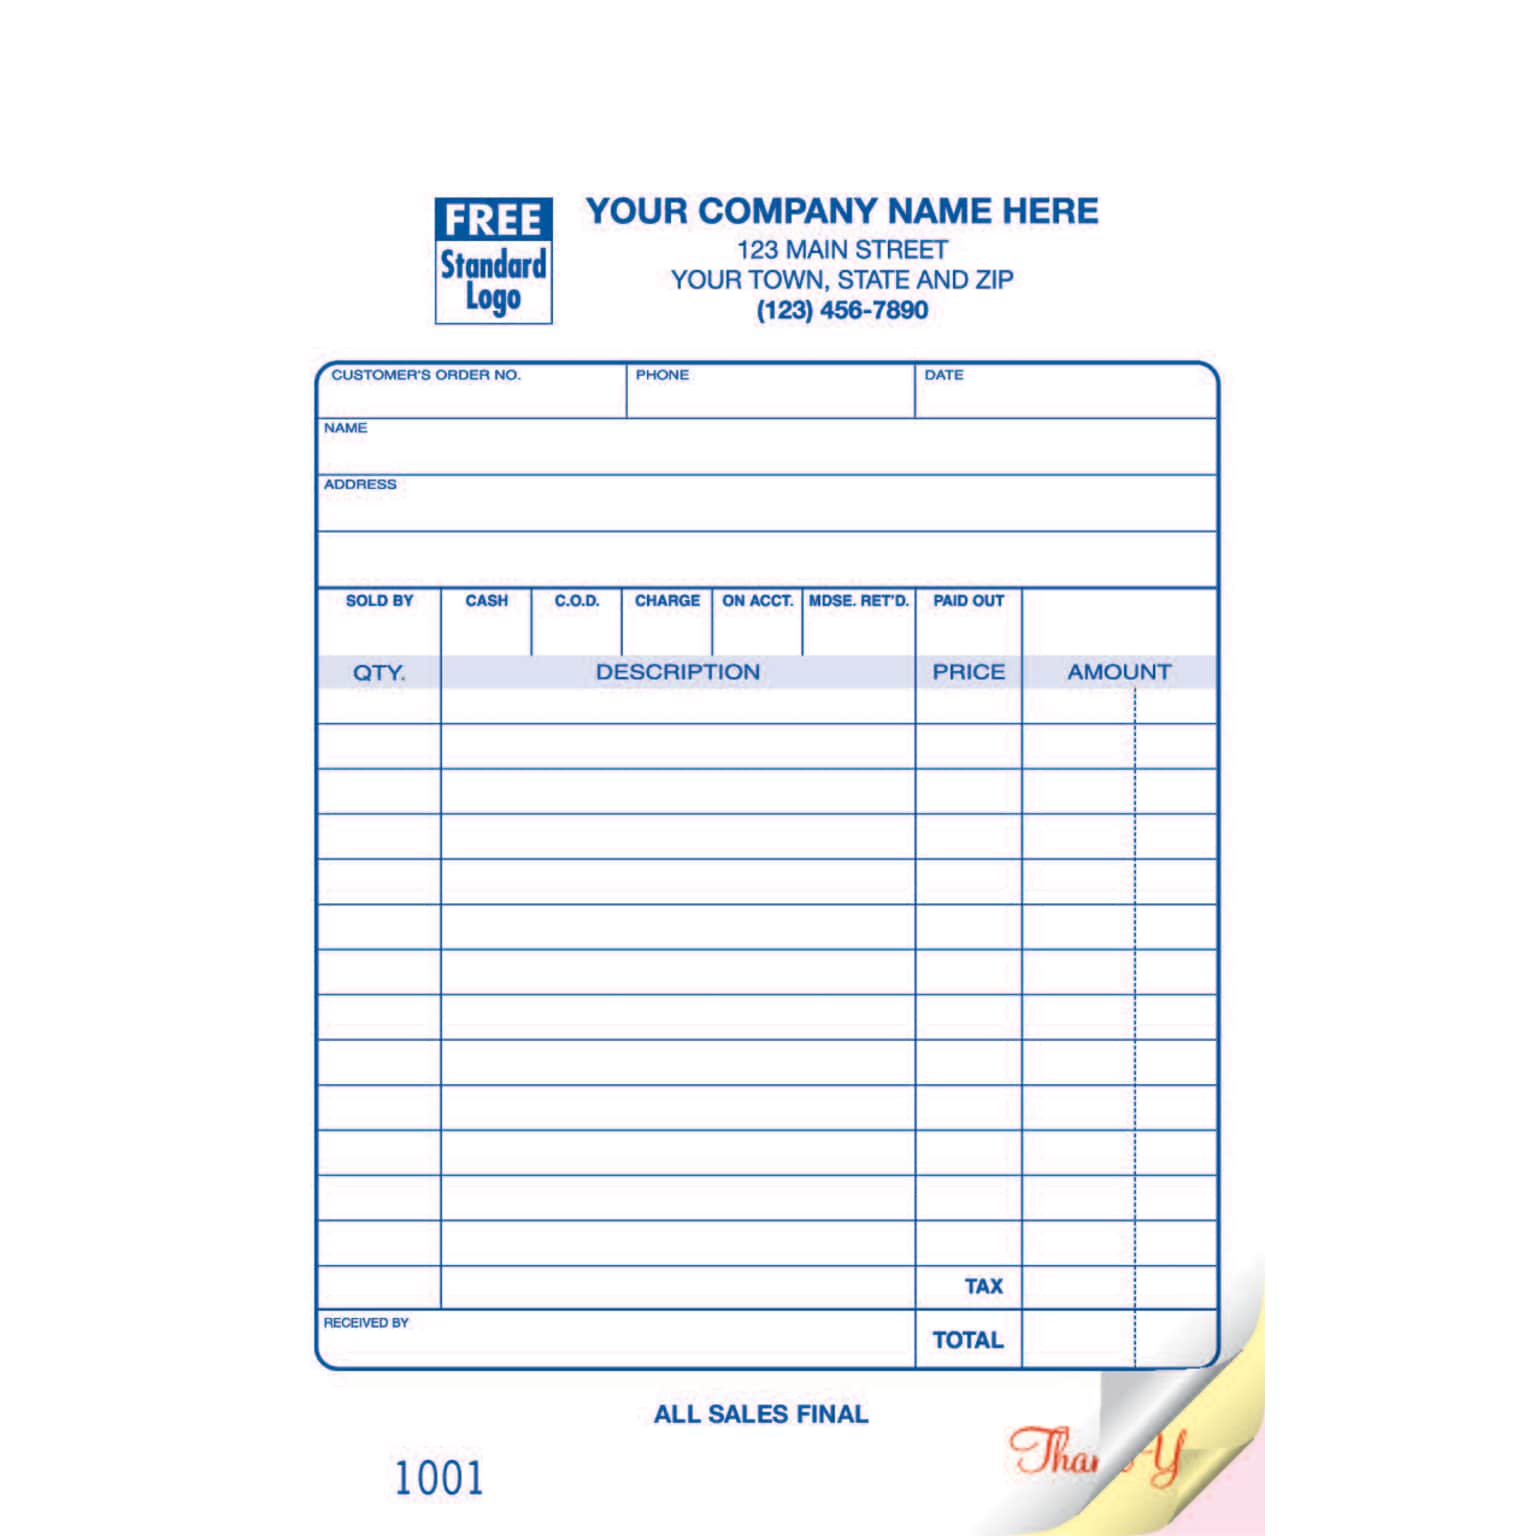 Custom Register Form, Classic Design, Large Format, ALL SALES FINAL, 3 Parts, 1 Color Printing, 5 1/2 x 8 1/2, 500/Pack